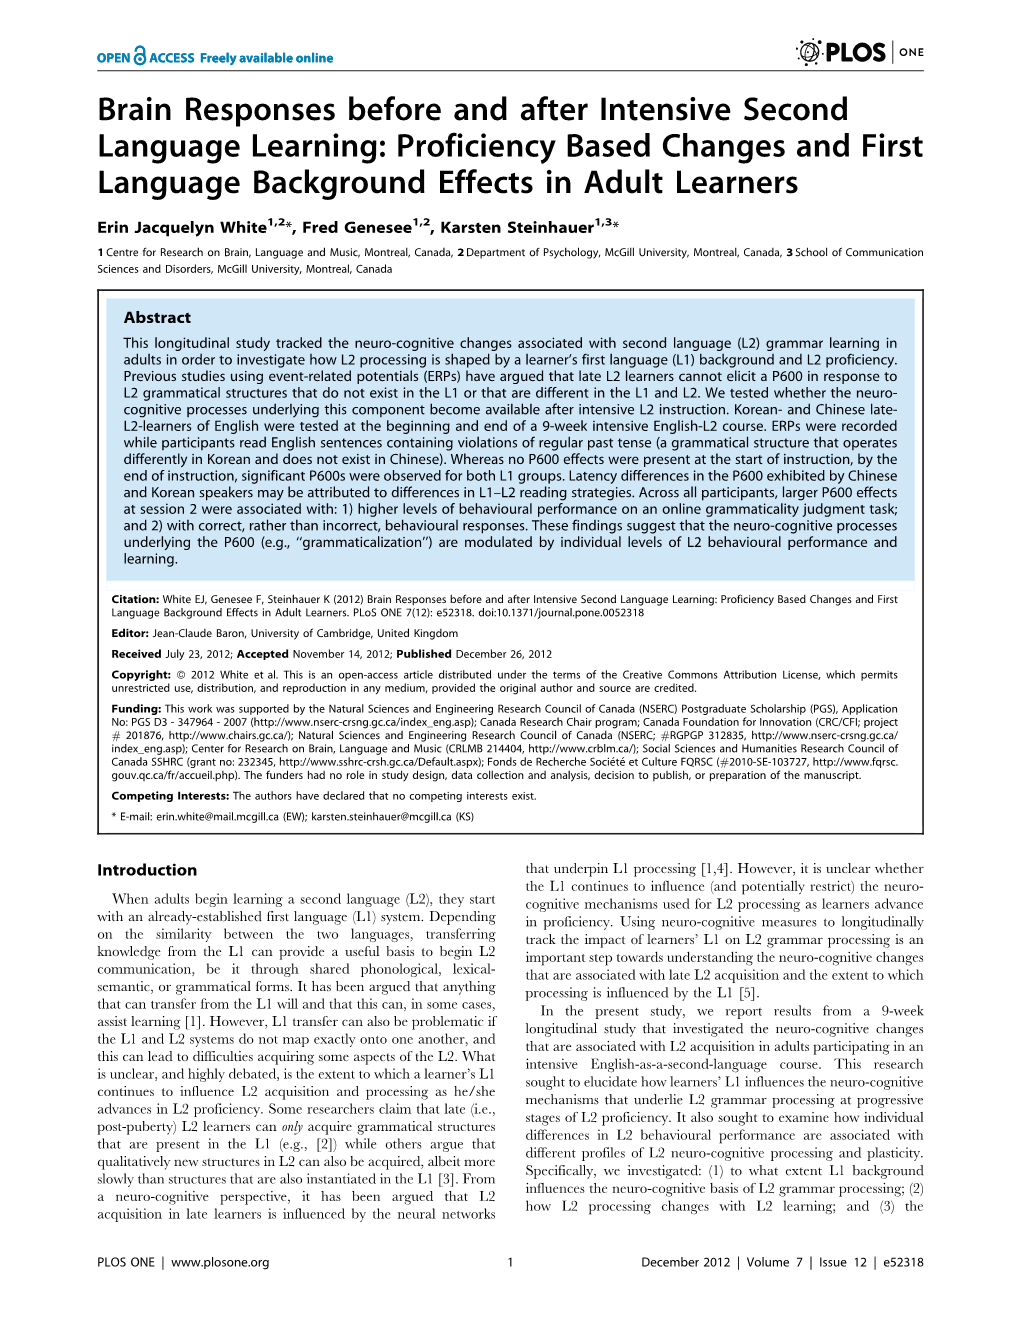 Brain Responses Before and After Intensive Second Language Learning: Proficiency Based Changes and First Language Background Effects in Adult Learners